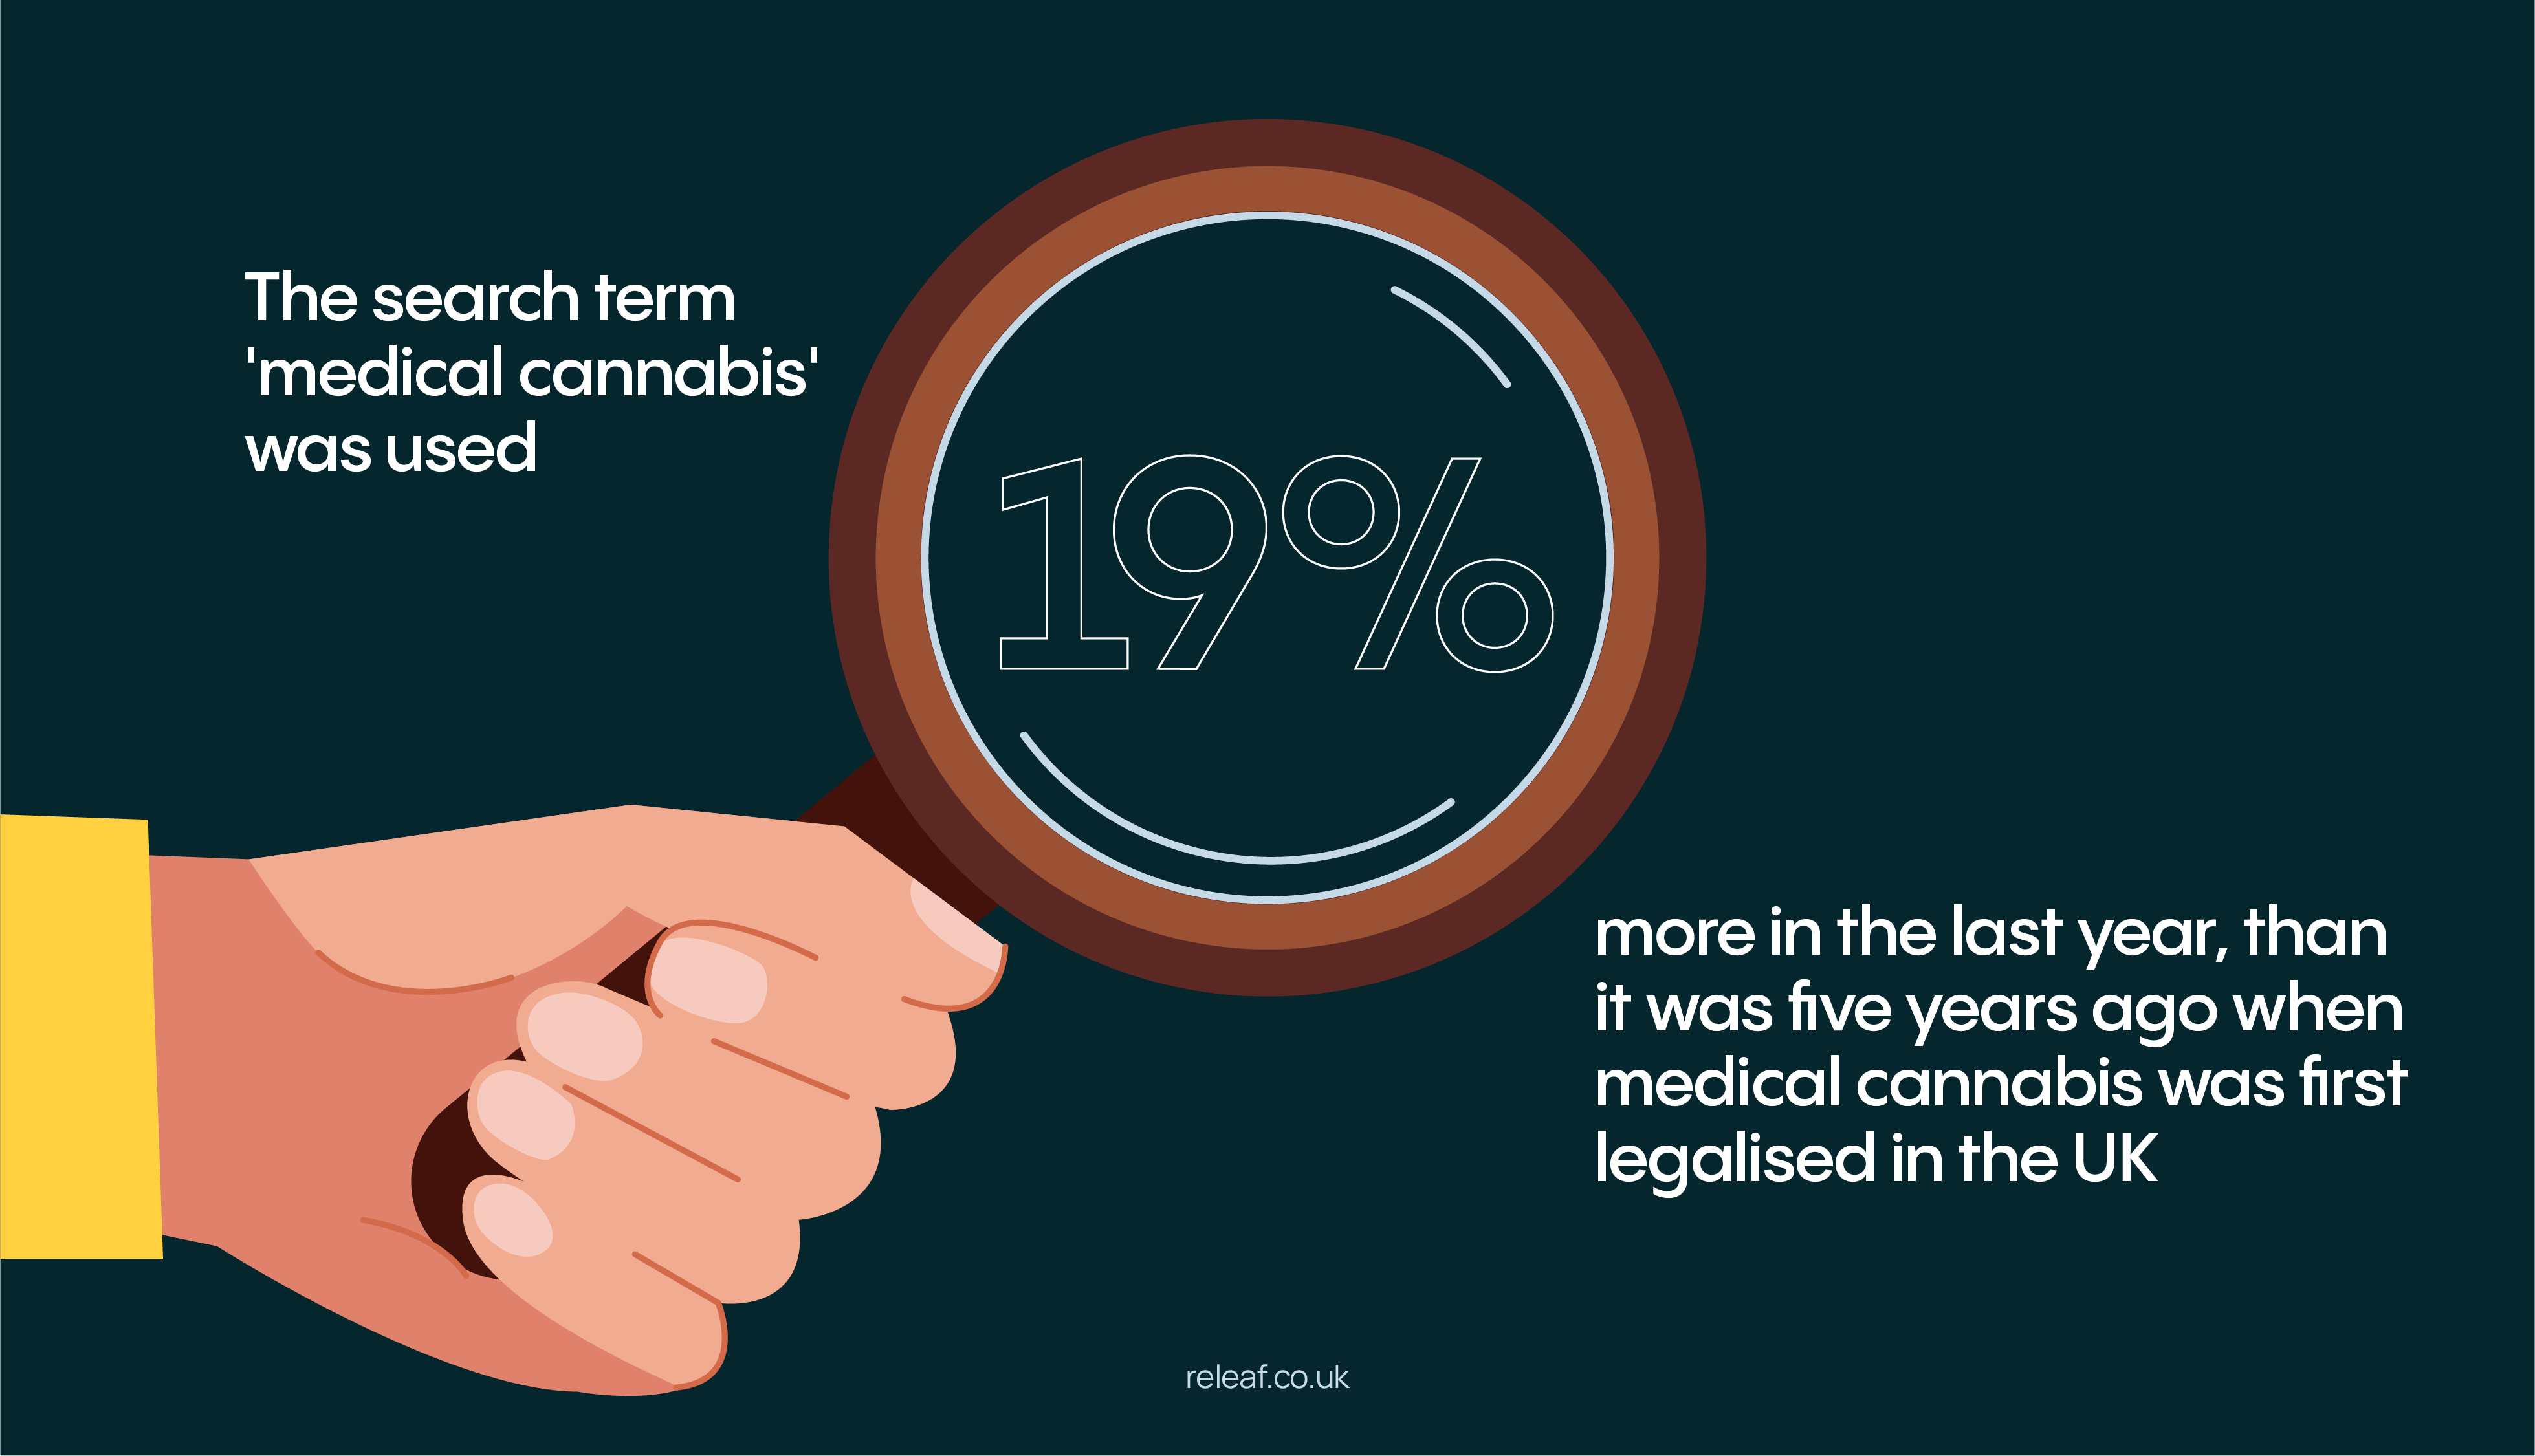 In the UK, the search term ‘medical cannabis’ was used 19% more in the last year, than it was 5 years ago, when medical cannabis was first legalised